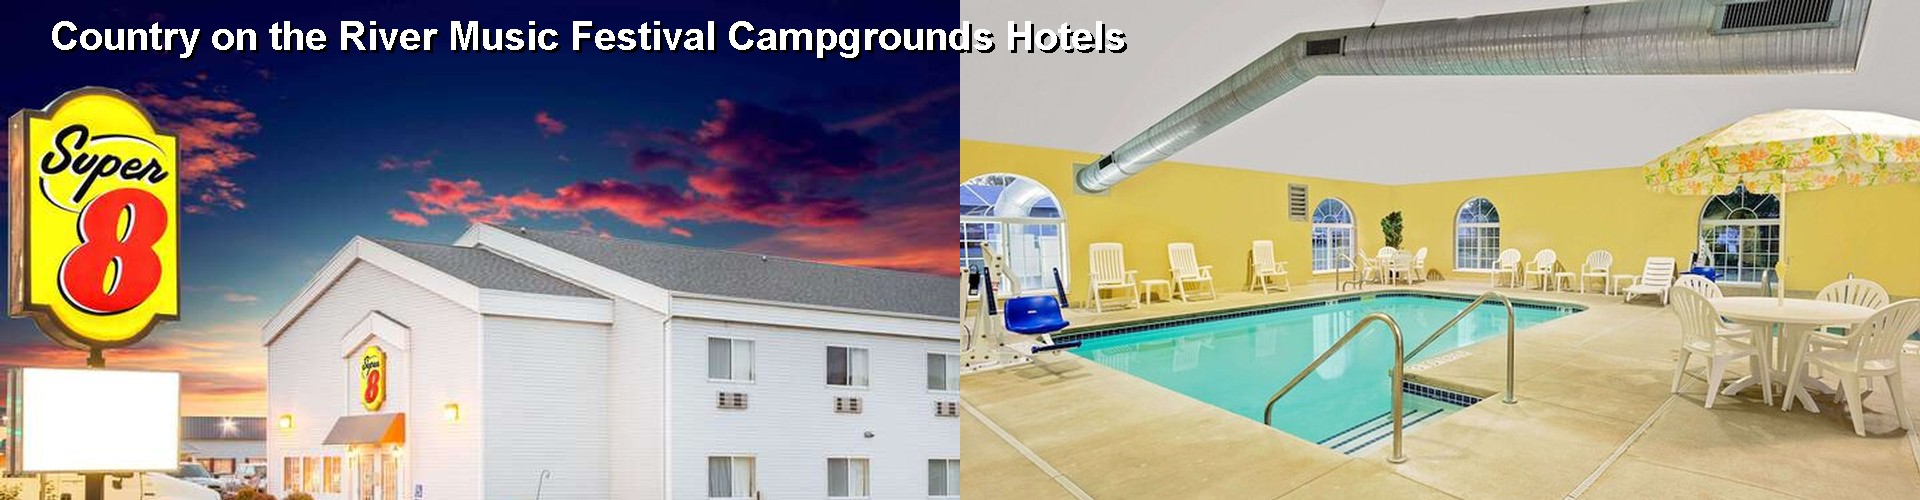 5 Best Hotels near Country on the River Music Festival Campgrounds